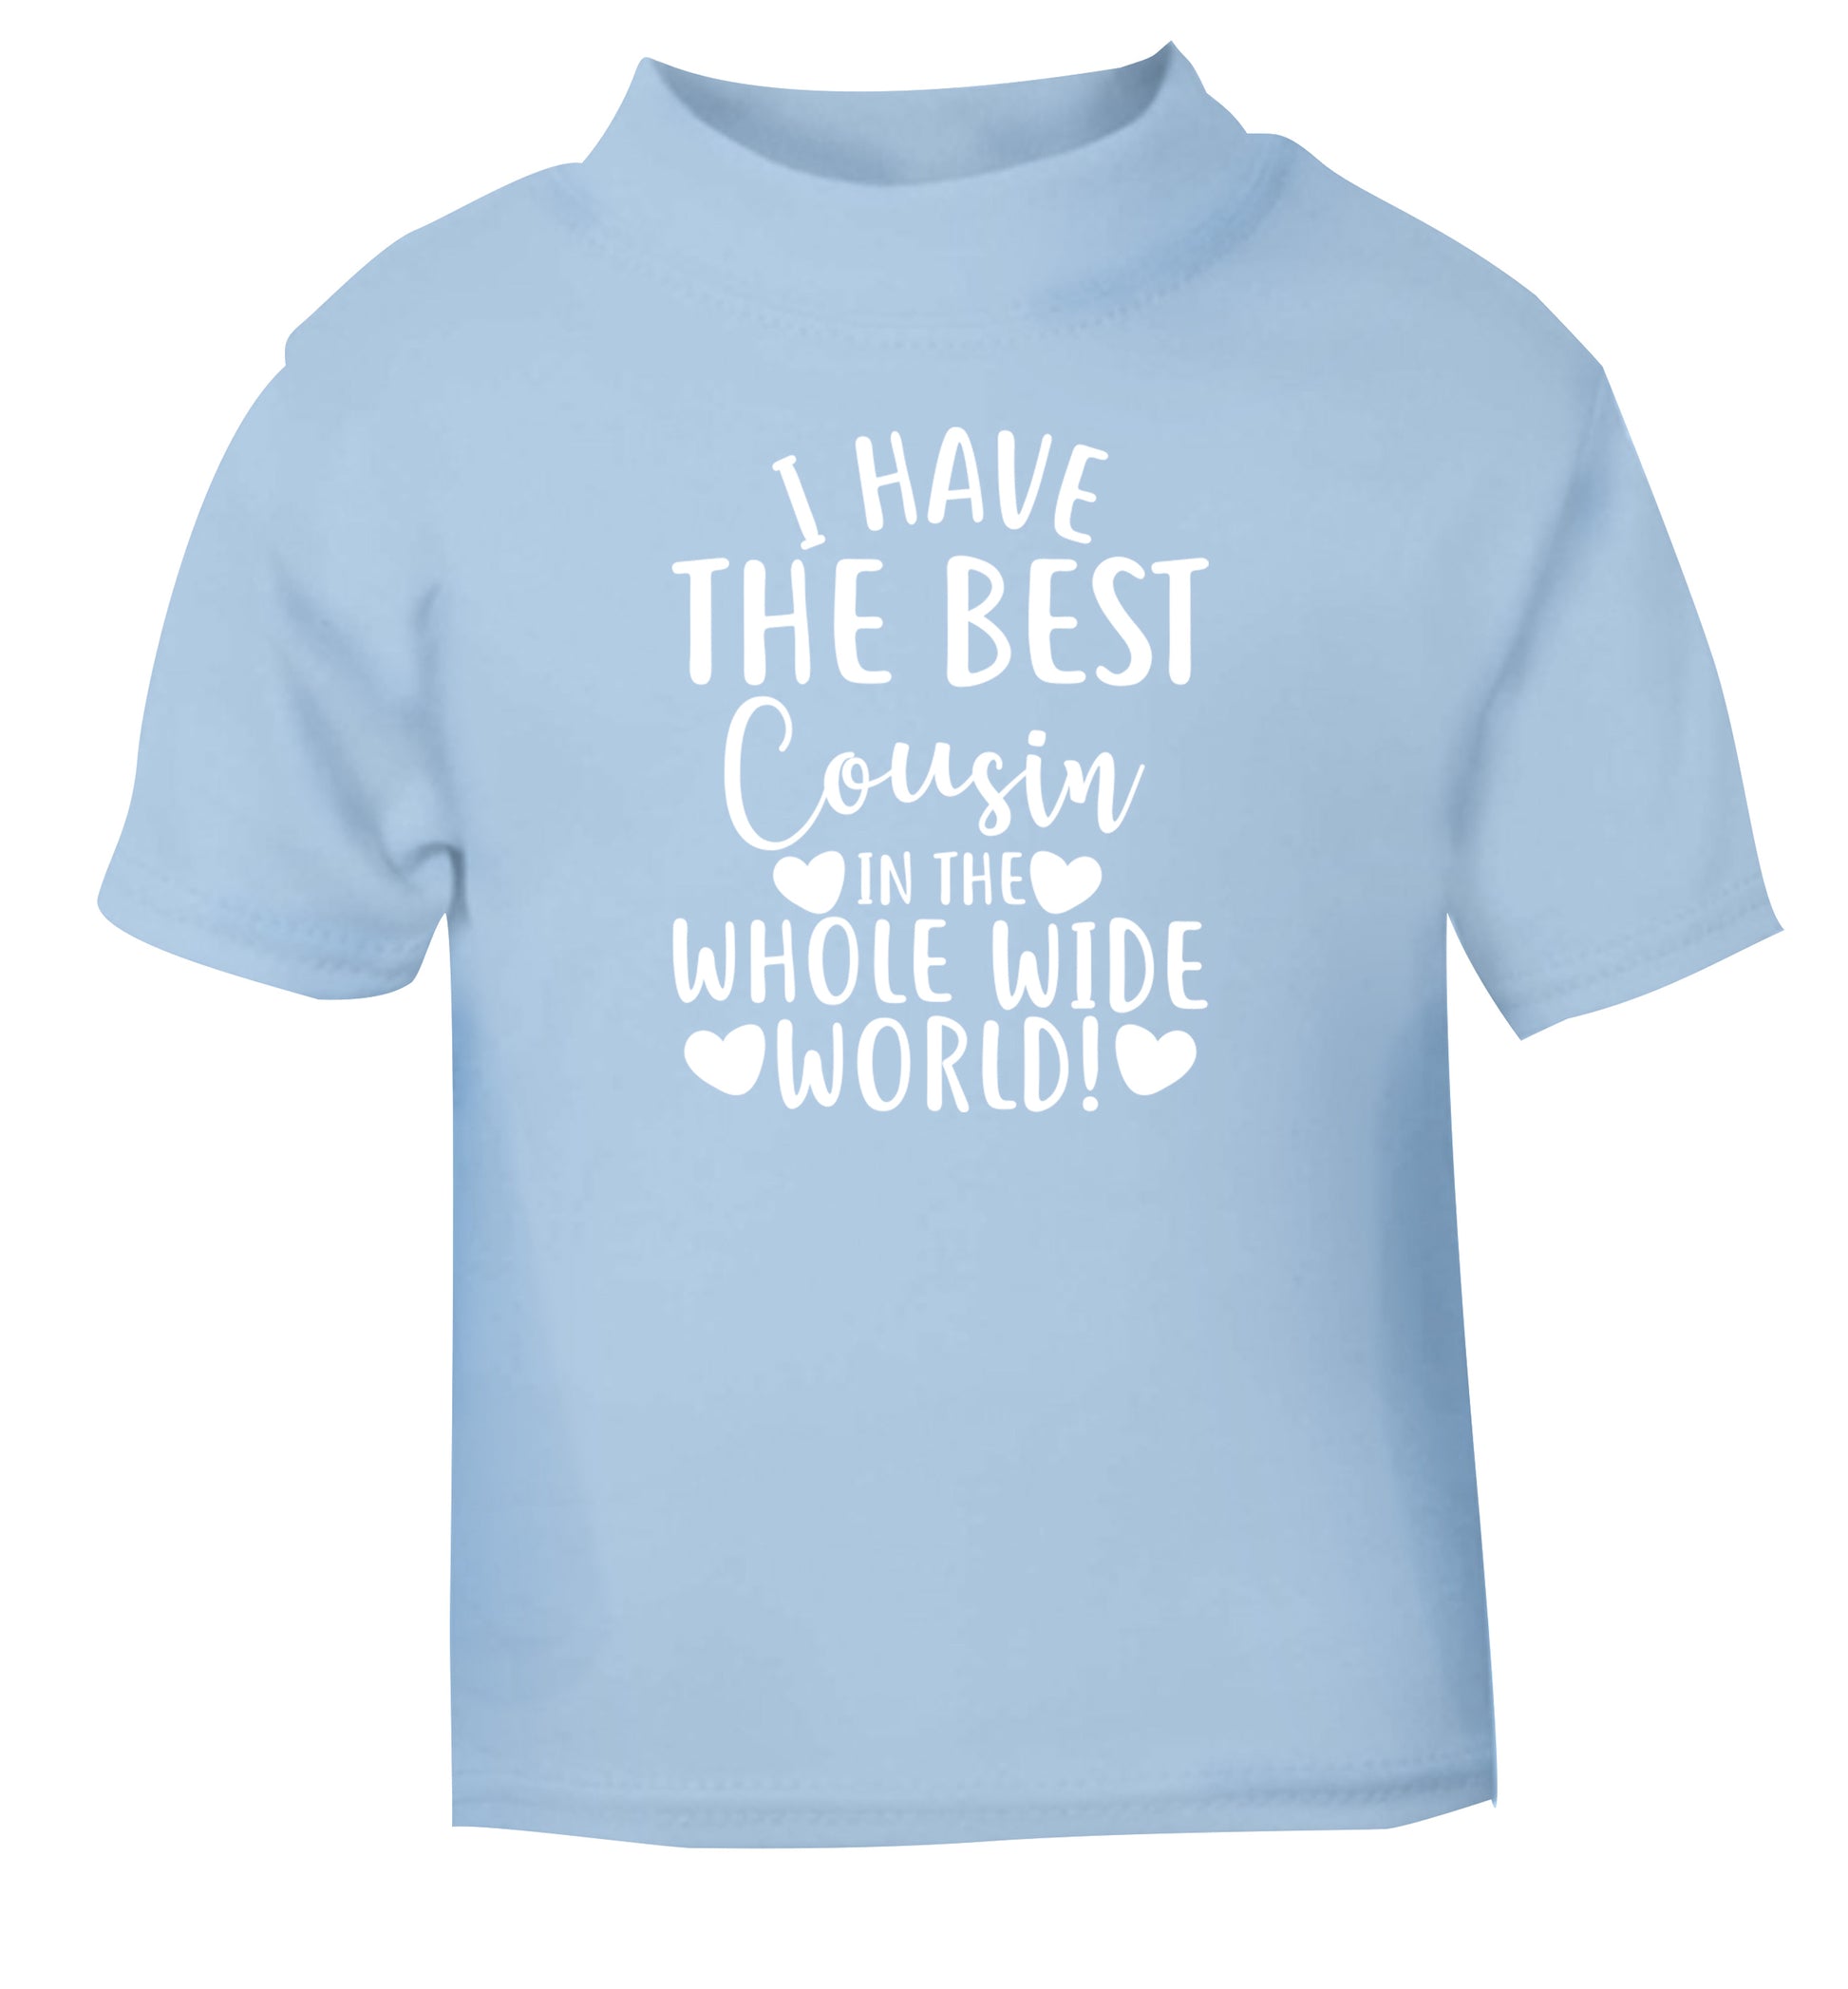 I have the best cousin in the whole wide world! light blue Baby Toddler Tshirt 2 Years